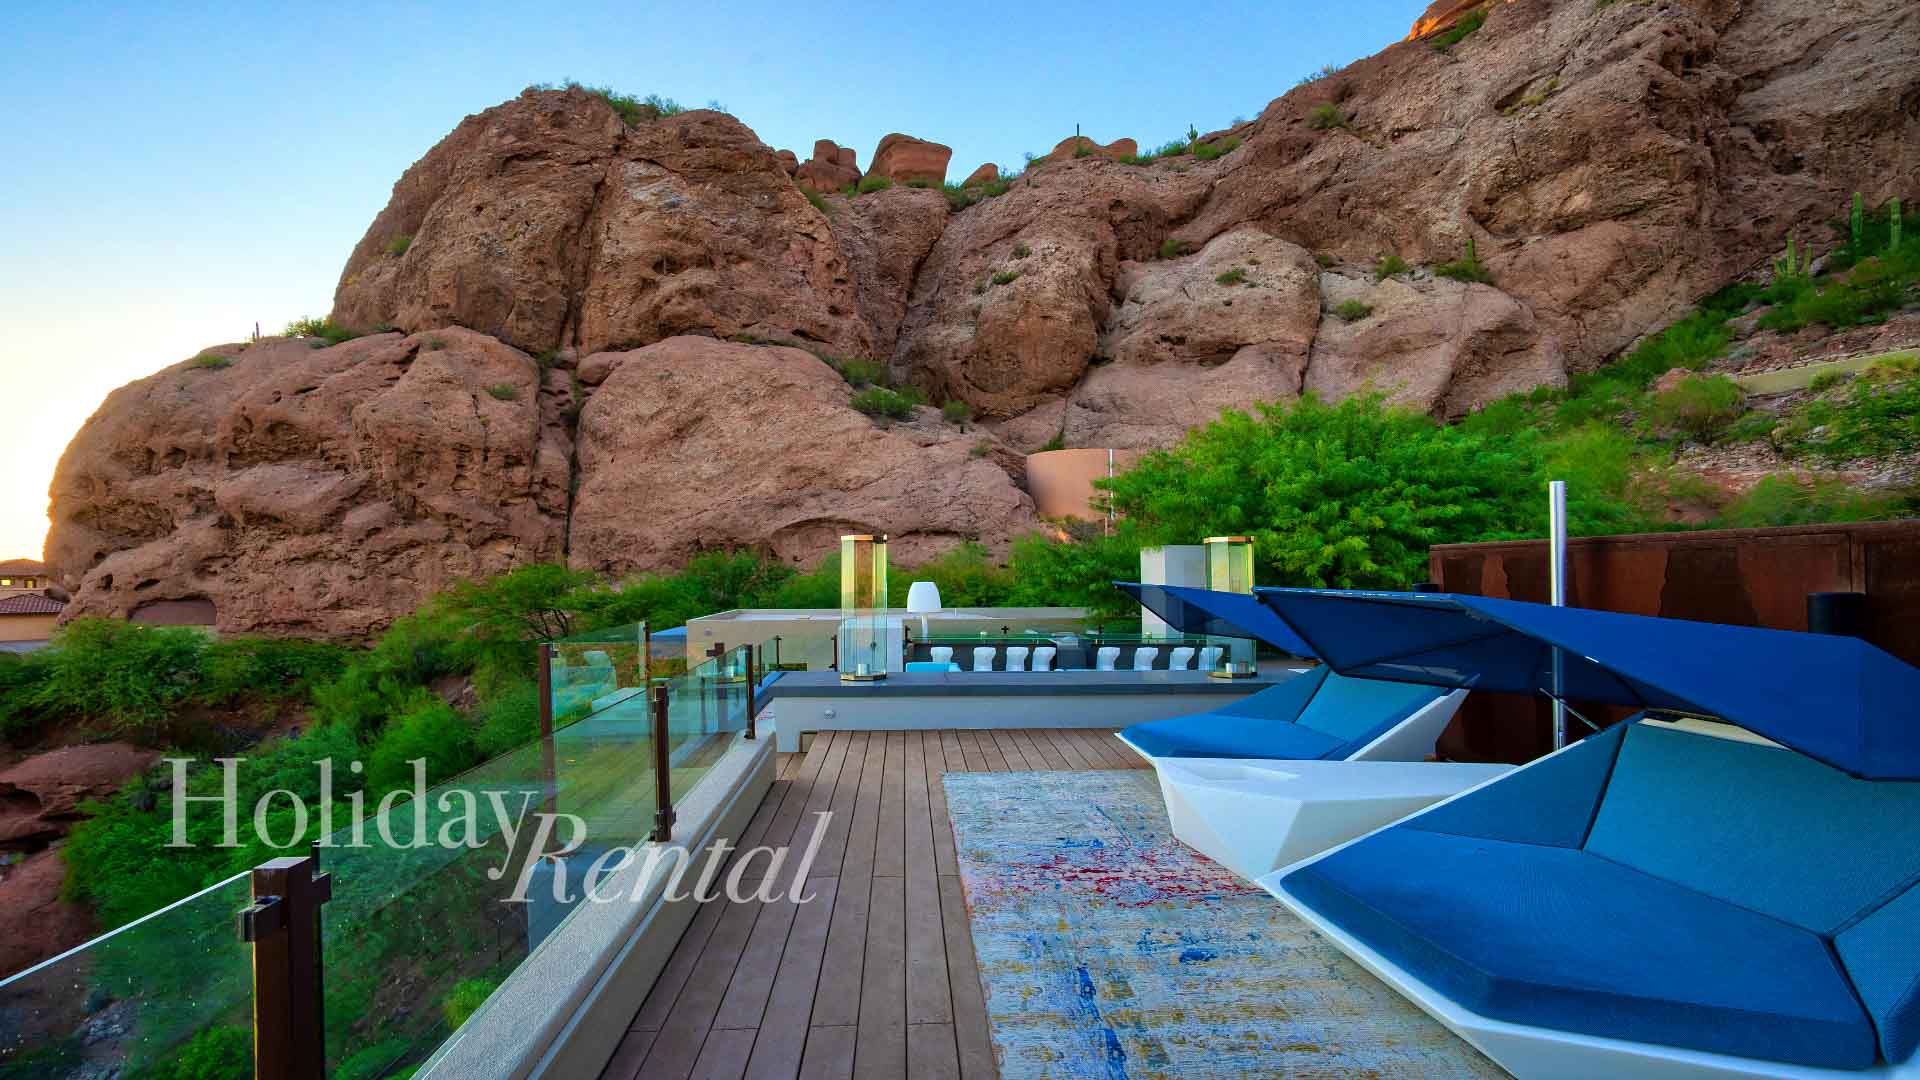 You'll be surrounded by beautiful Arizona mansions while you enjoy drinks on the rooftop patio